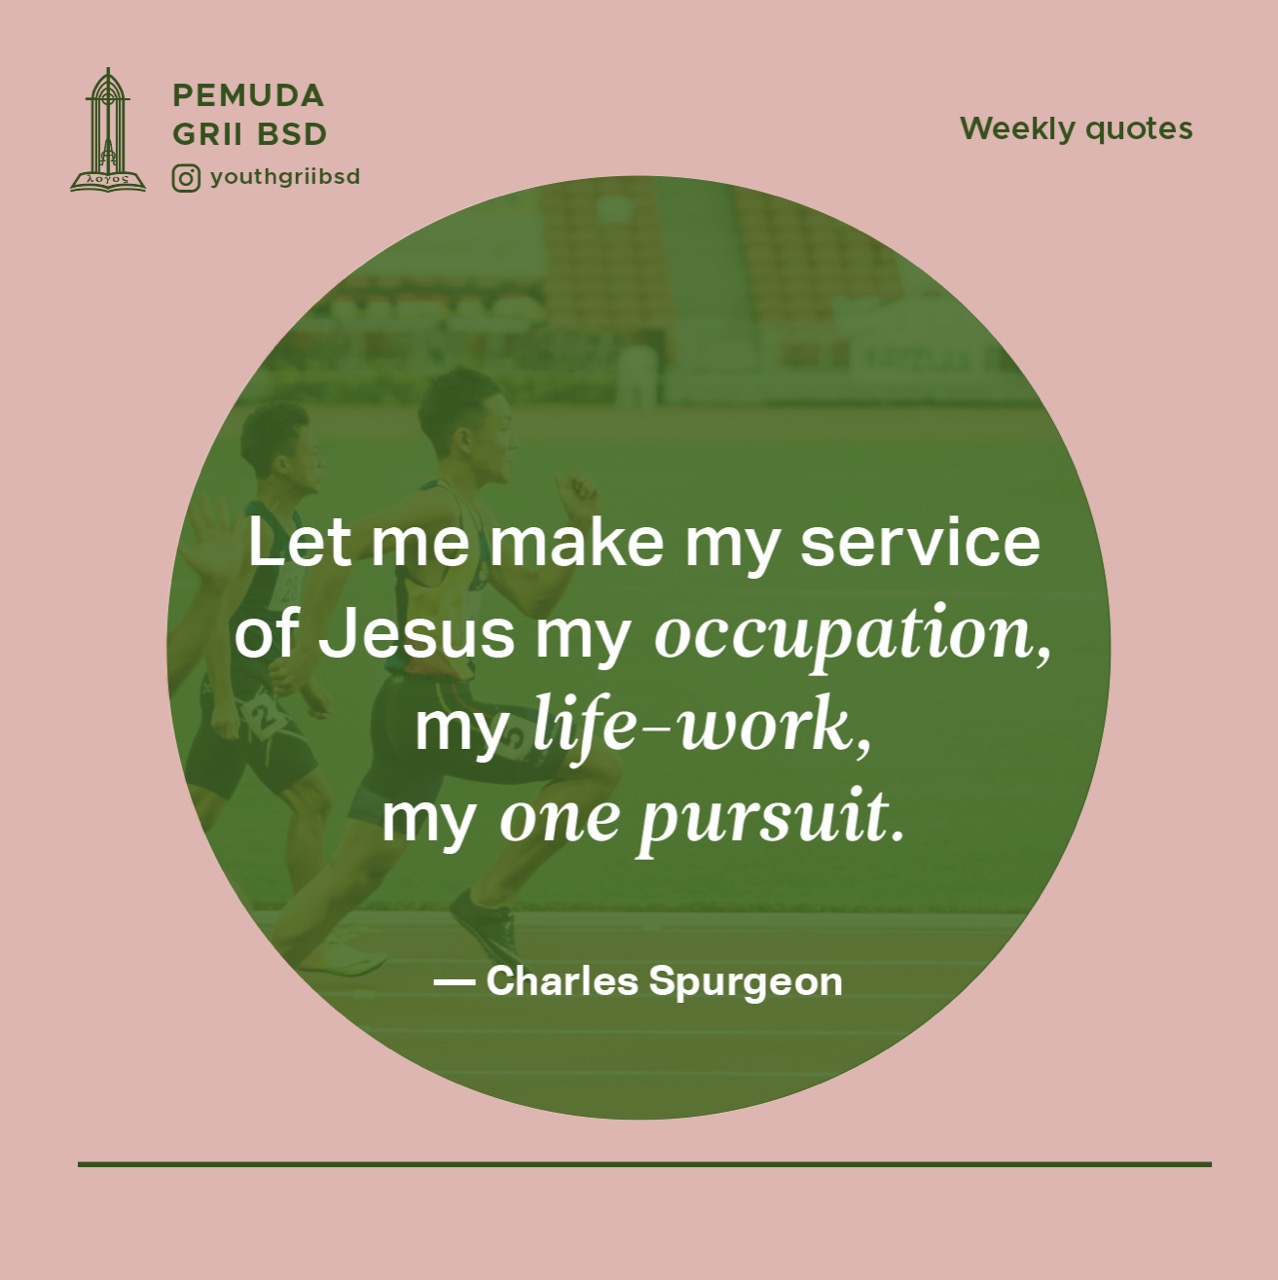 Let me make my service of Jesus my occupation, my life-work, my one pursuit